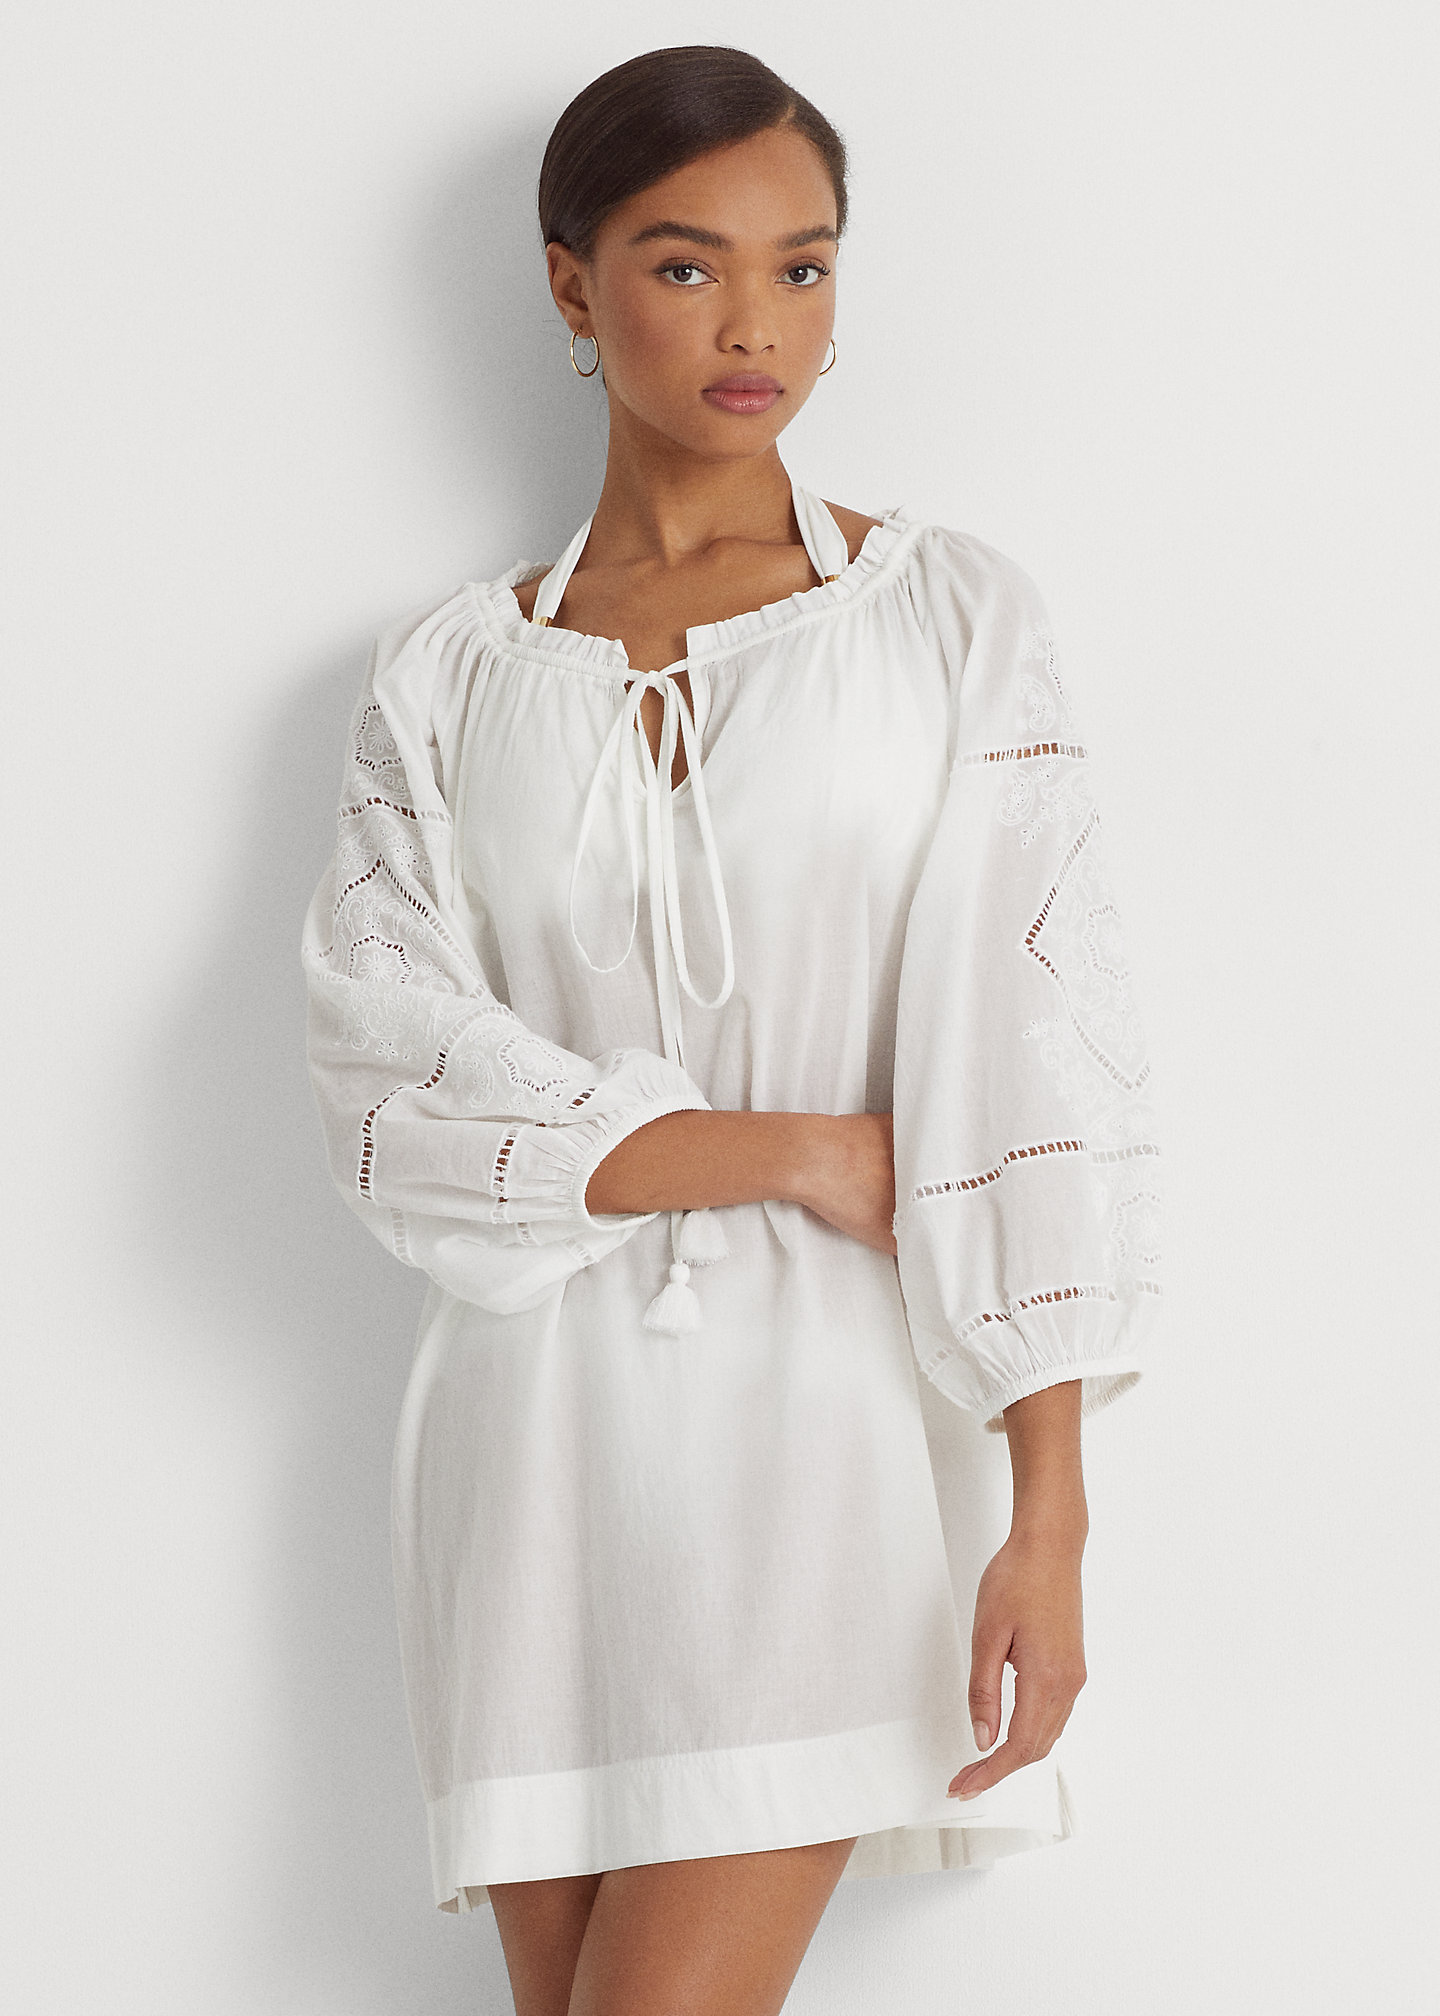 Eyelet Cotton Voile Cover-Up Dress